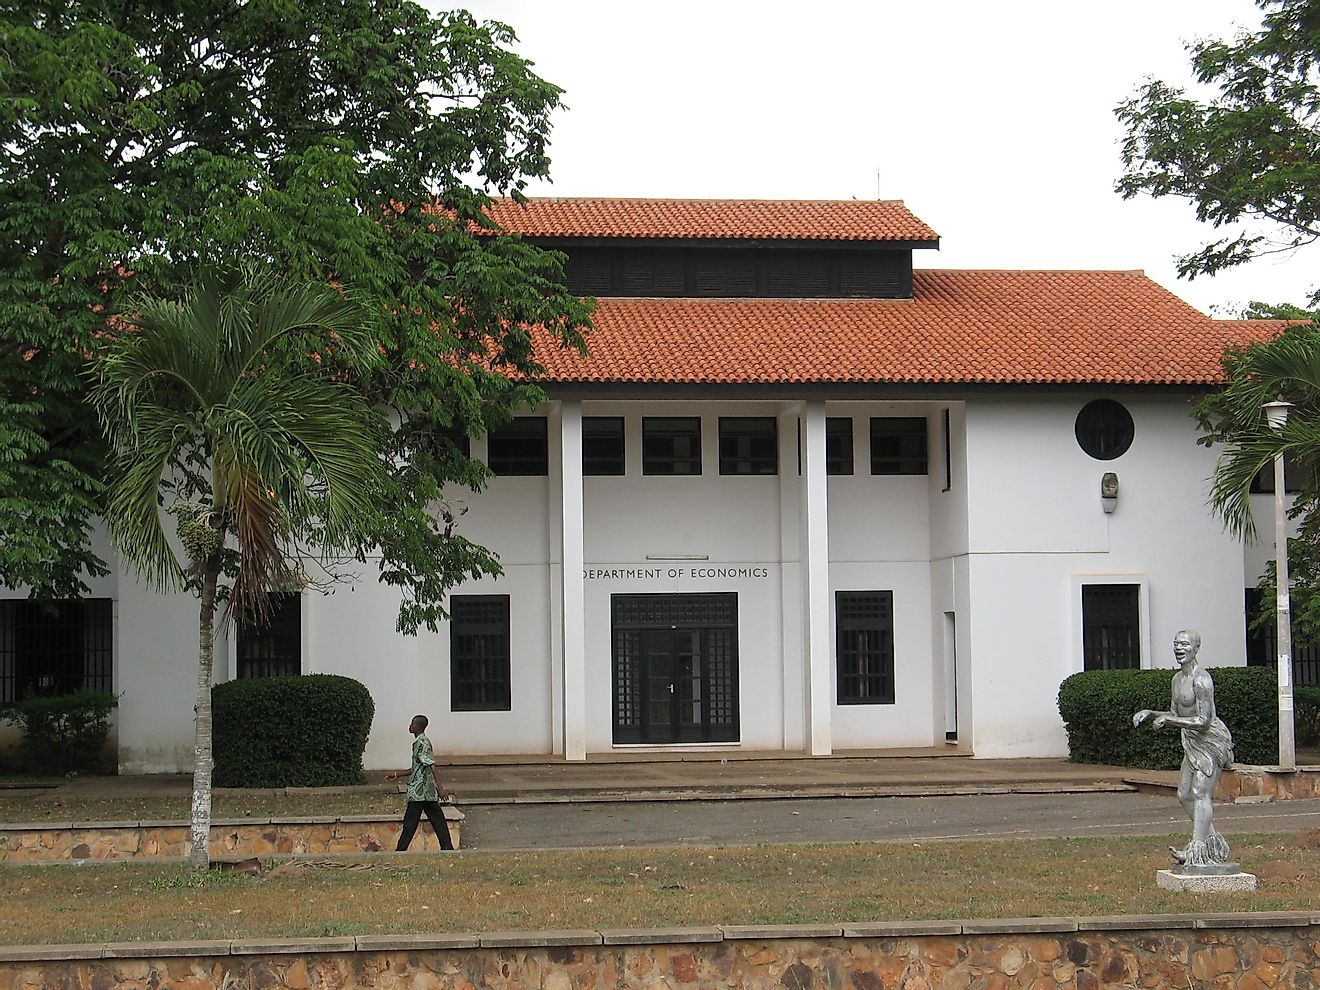 University of Ghana is both the oldest and the largest university in the country.